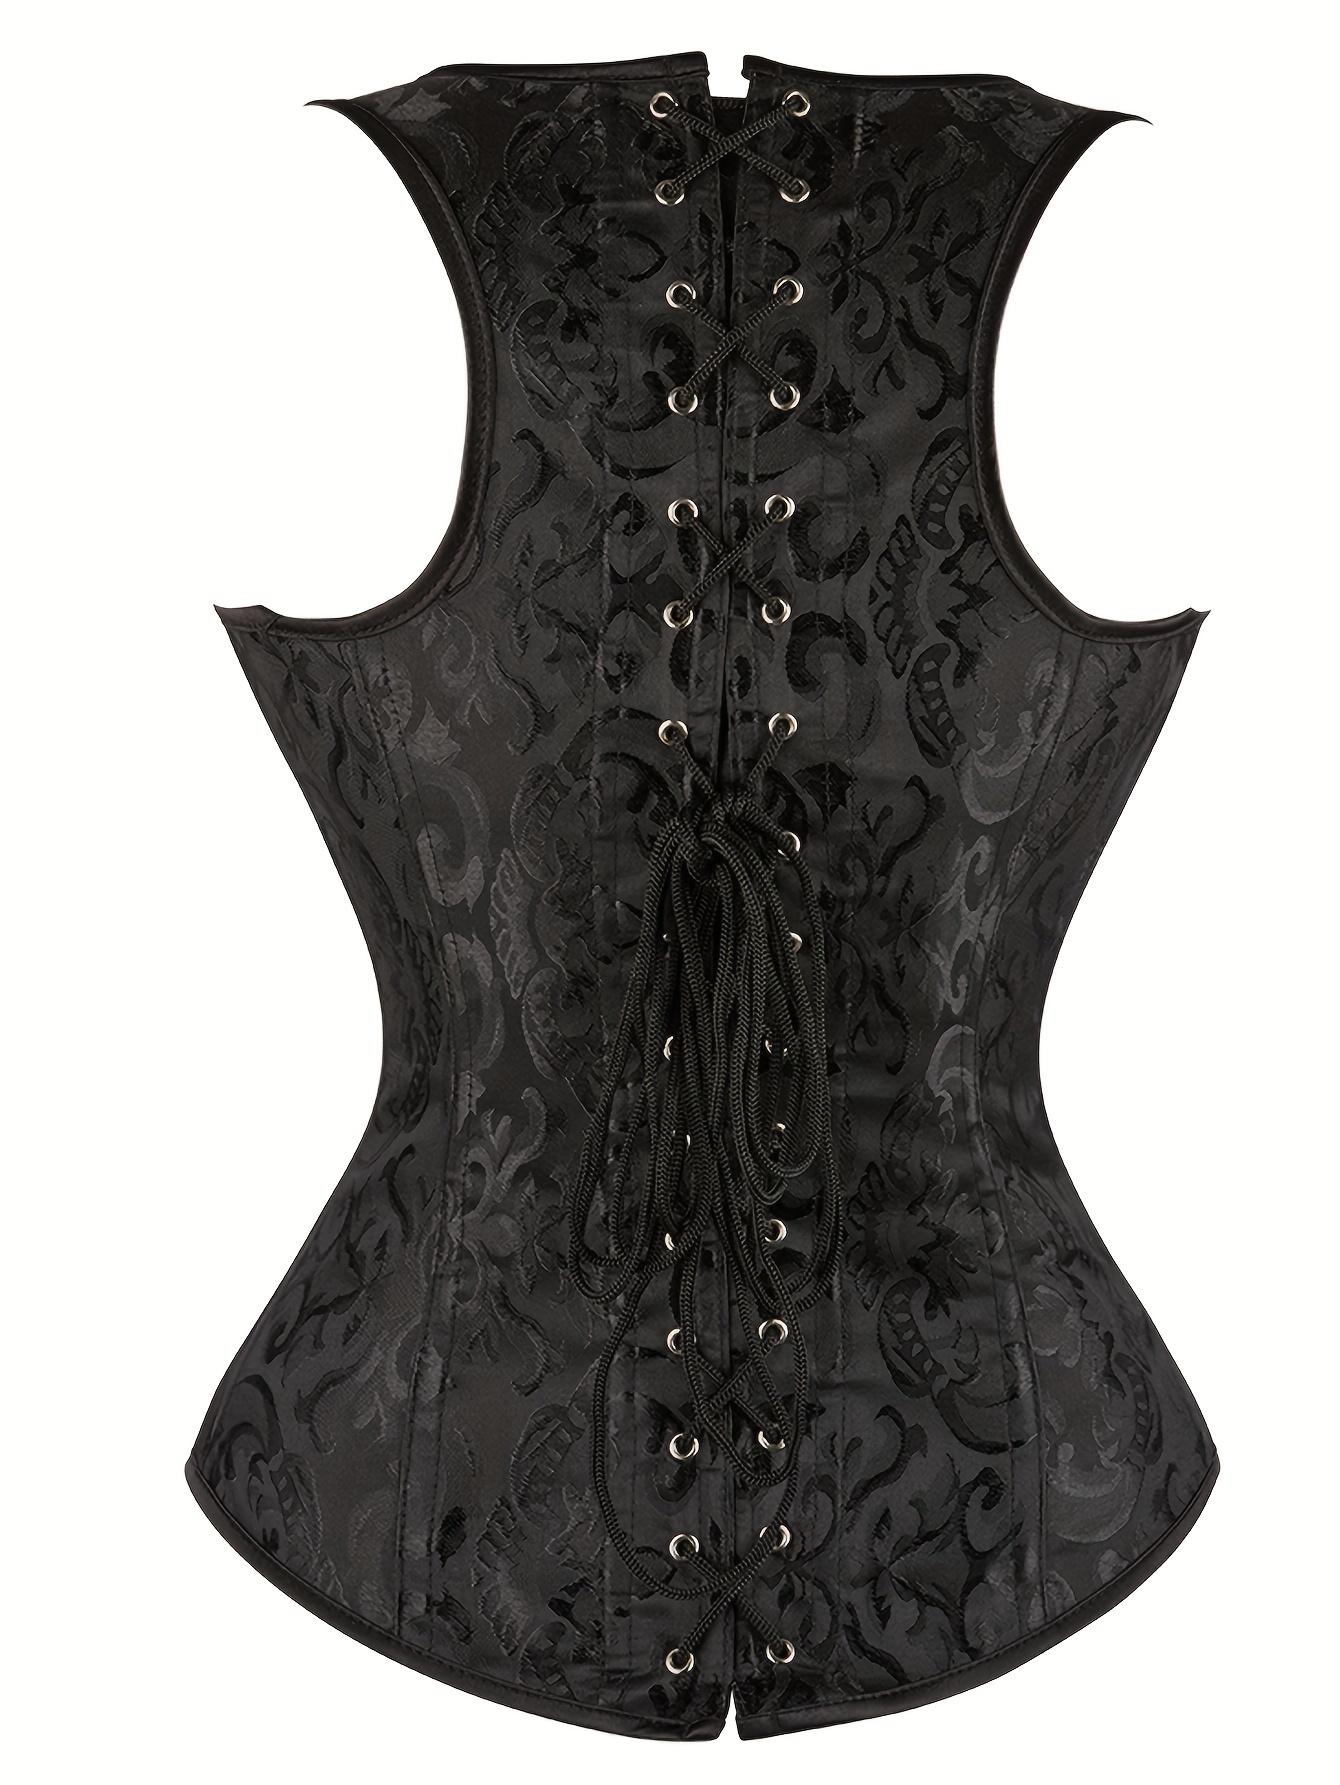 Victorian Corset Sexy Bustier Top Corselet Overbust Paisley